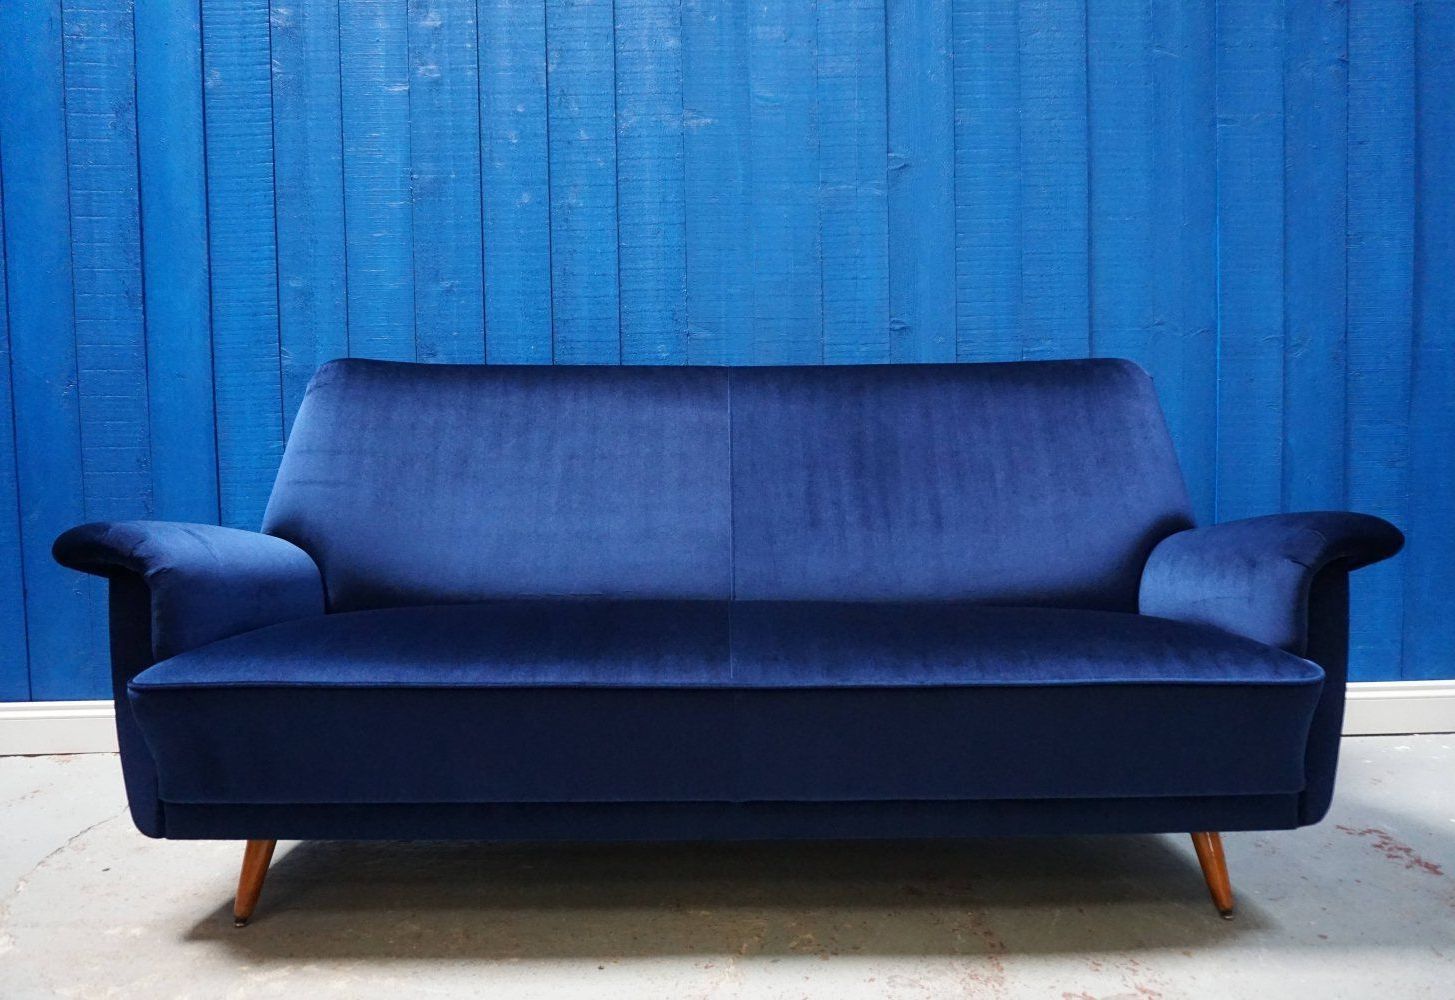 Best And Newest Dove Mid Century Sectional Sofas Dark Blue Inside For Sale: Mid Century Danish Sofa In Luxury Navy Blue (View 11 of 25)